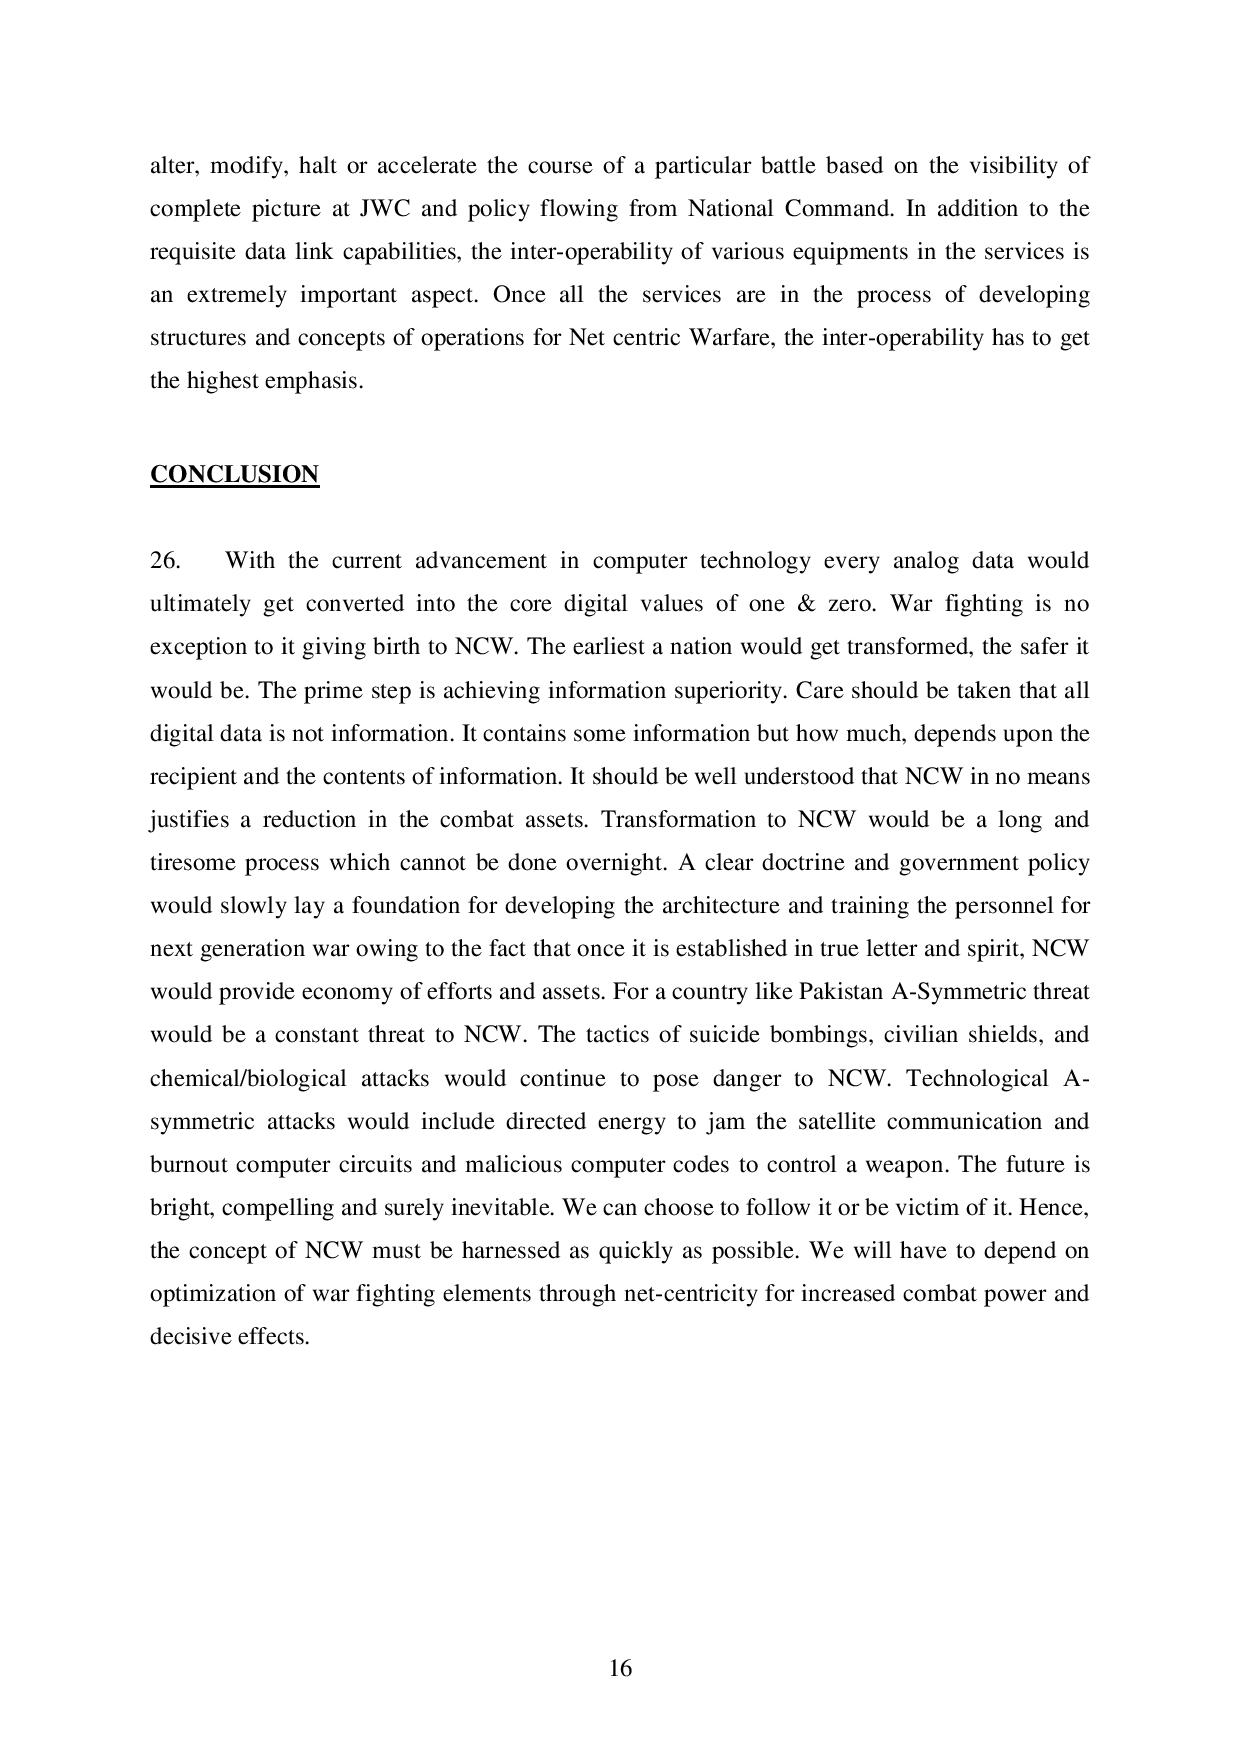 LINK_NETWORK CENTRIC WARFARE A NEW DIMENSION FOR PAKISTAN DEFENCE FORCES-page-016.jpg